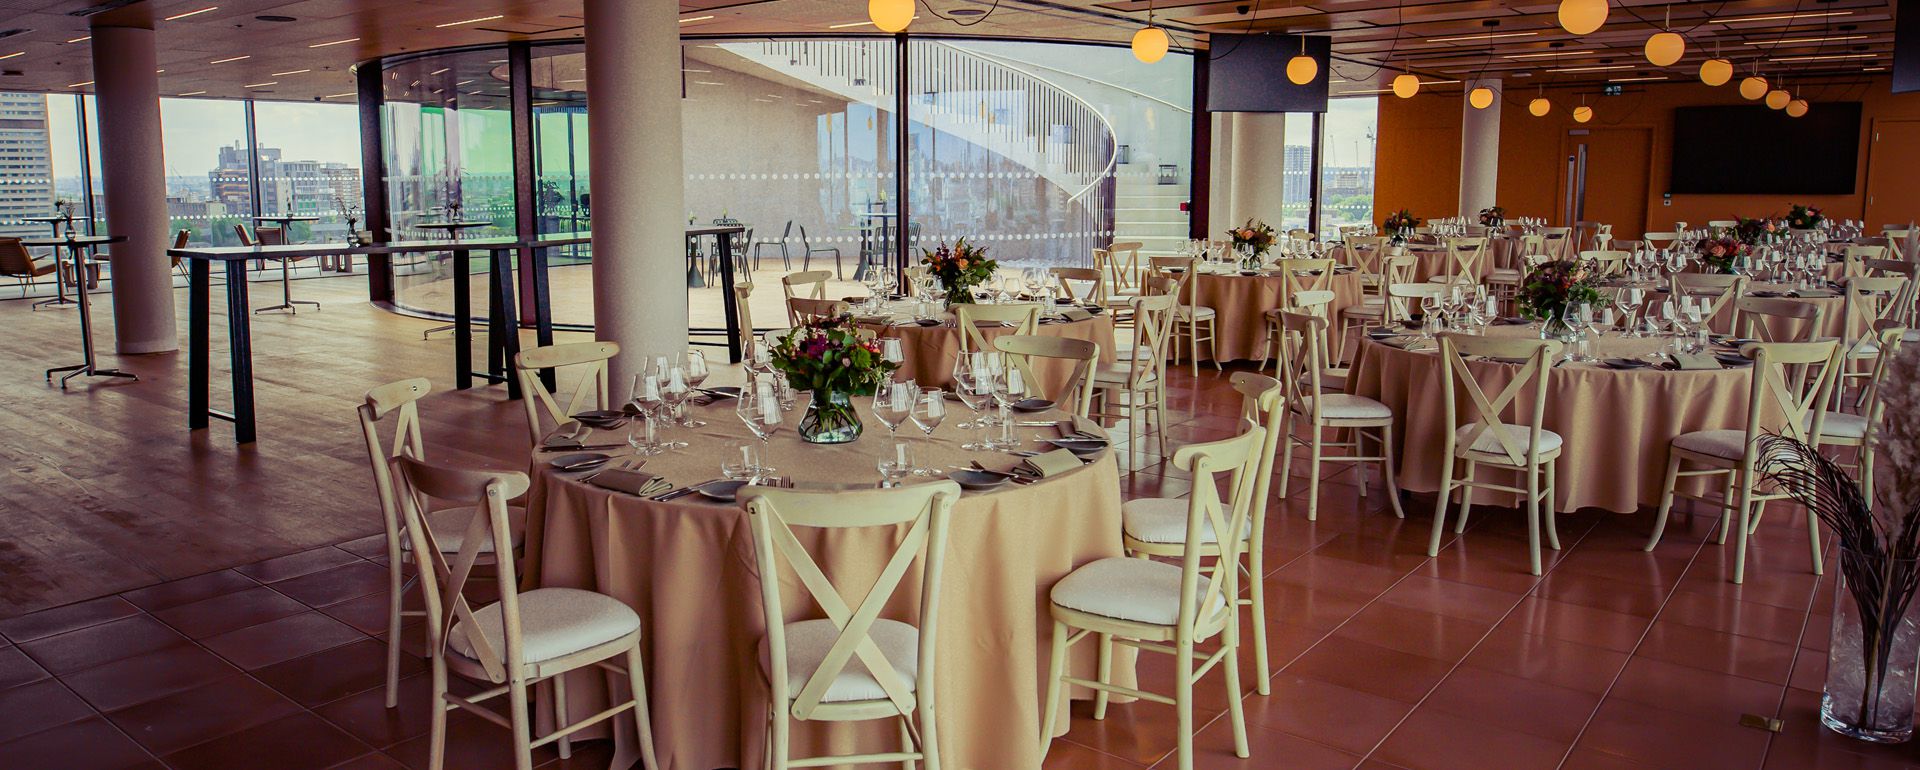 Wedding venue space with dressed tables